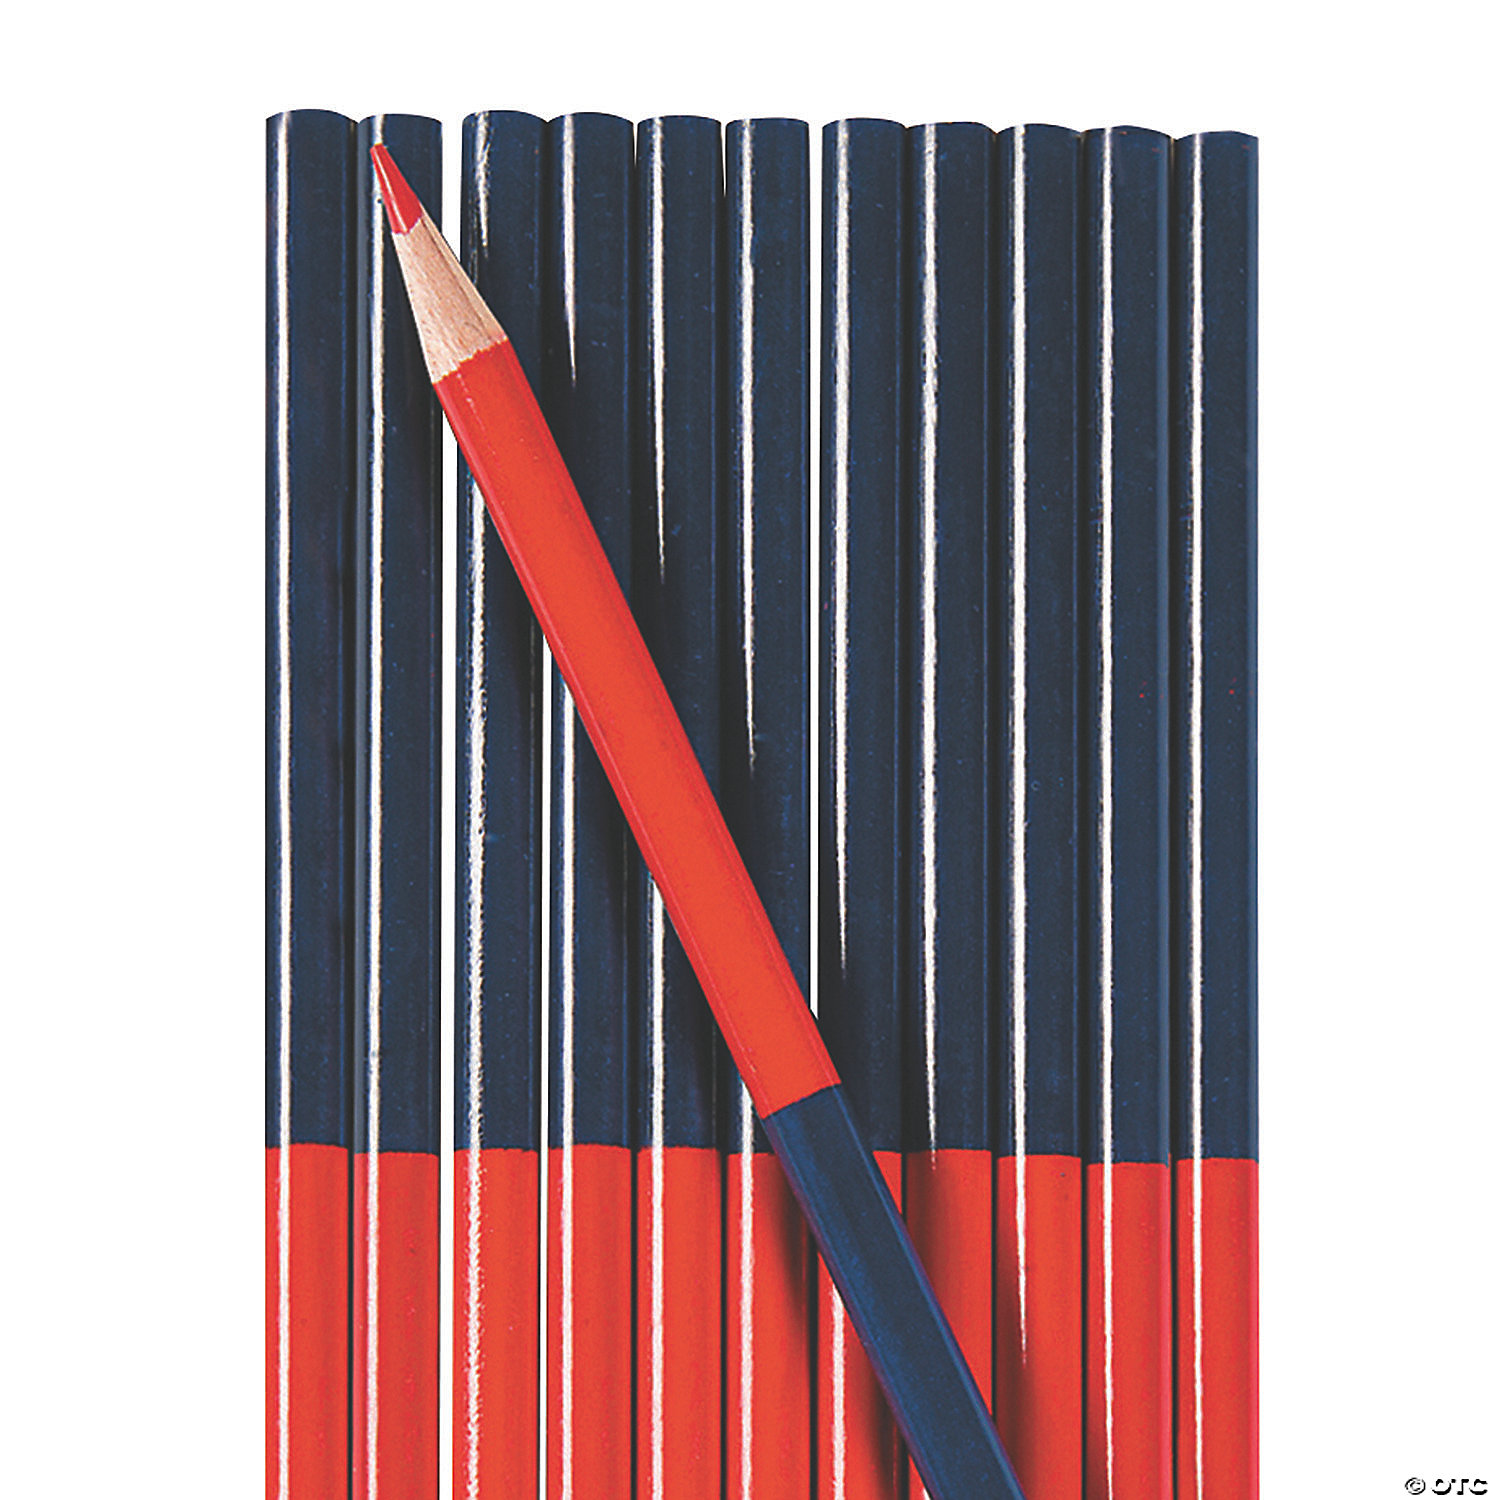 red office stationery